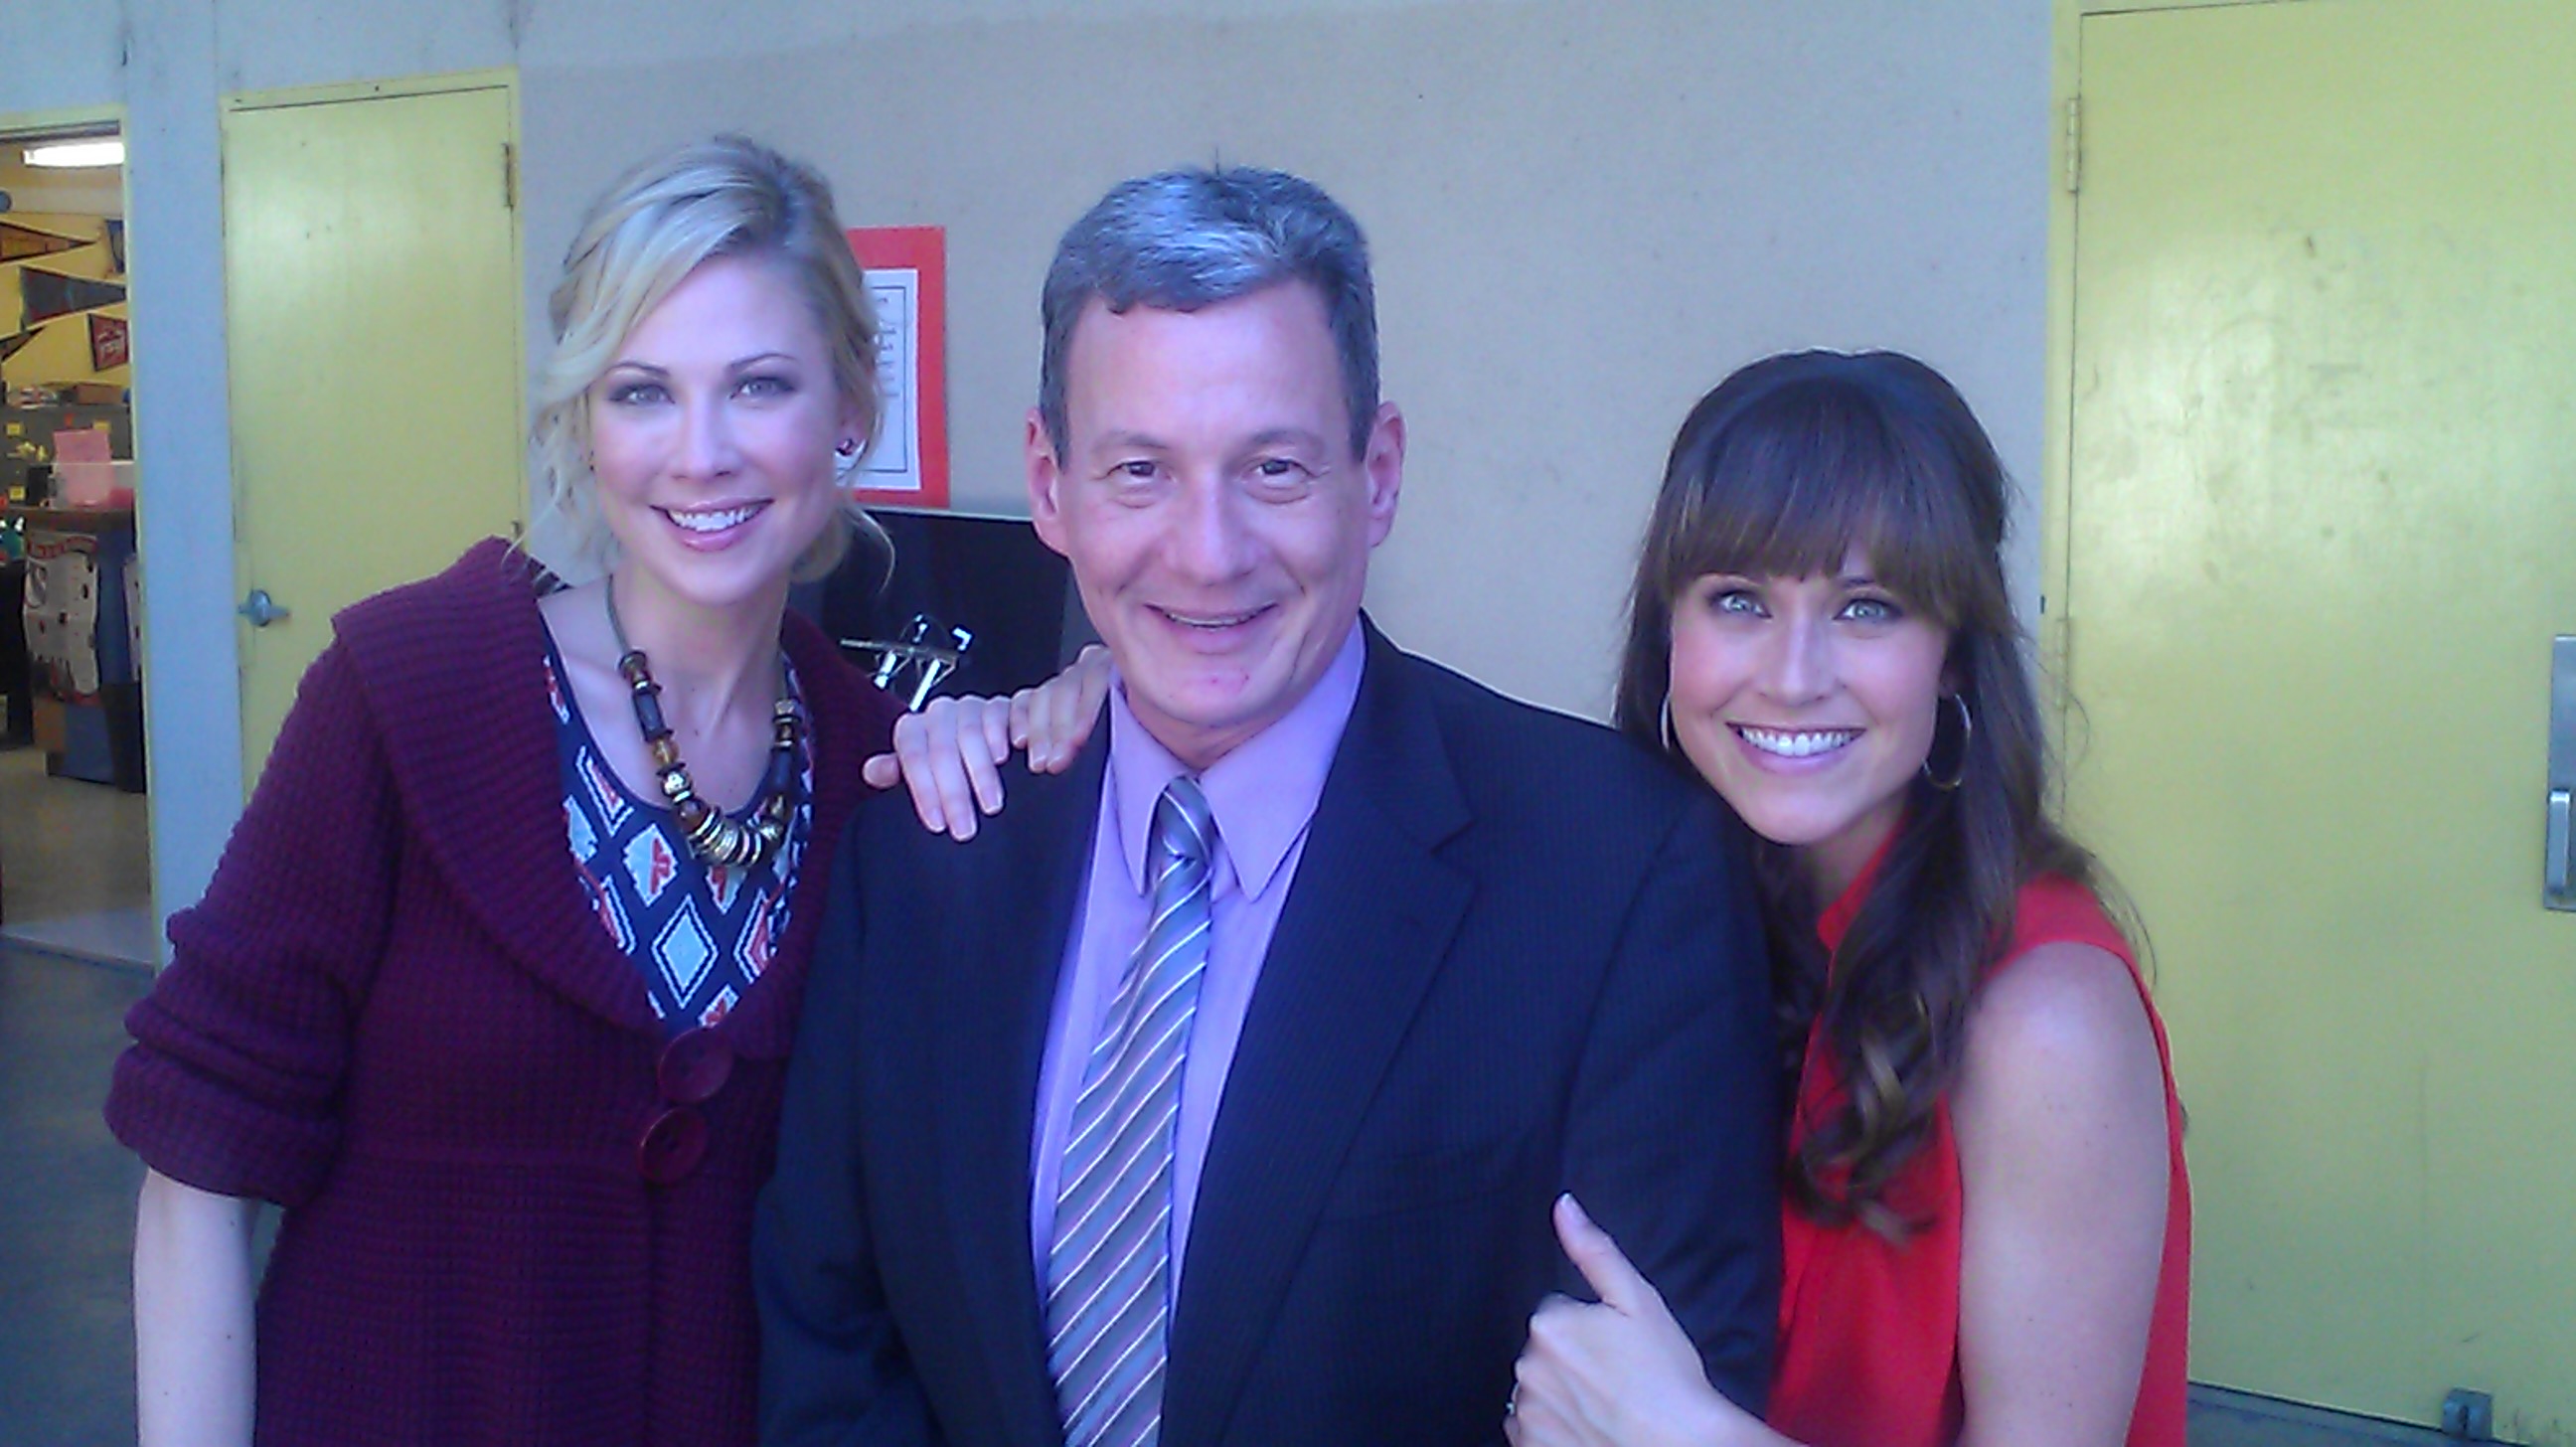 Filming the MTV TV series Awkward season 3 episode 19 with Nikki De Loach and Desi Lydic playing school board member